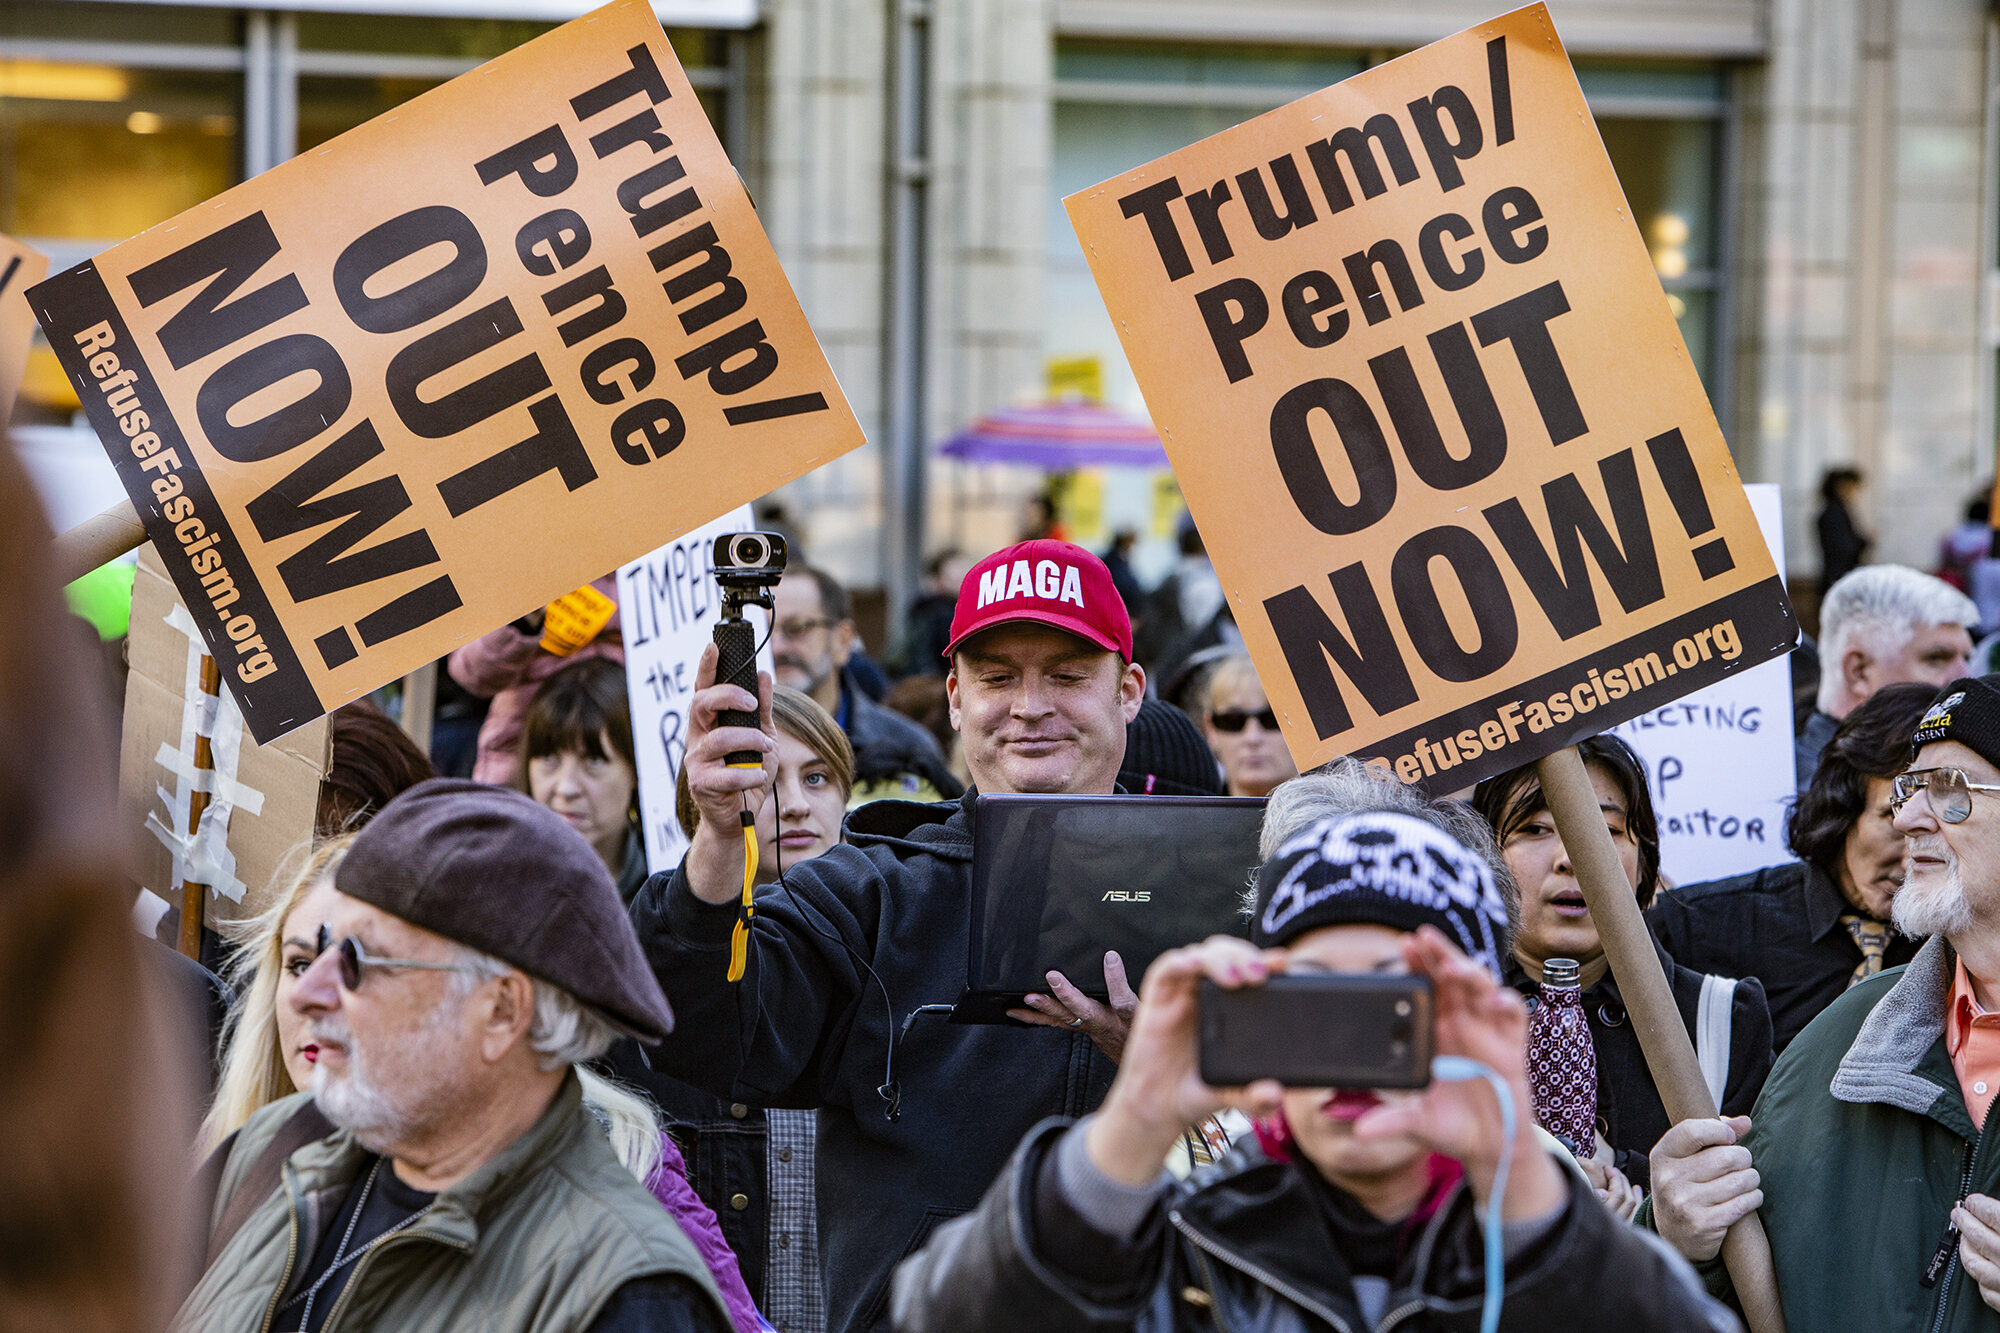 OUTNOW_Protest_2019_NYC-0441.jpg